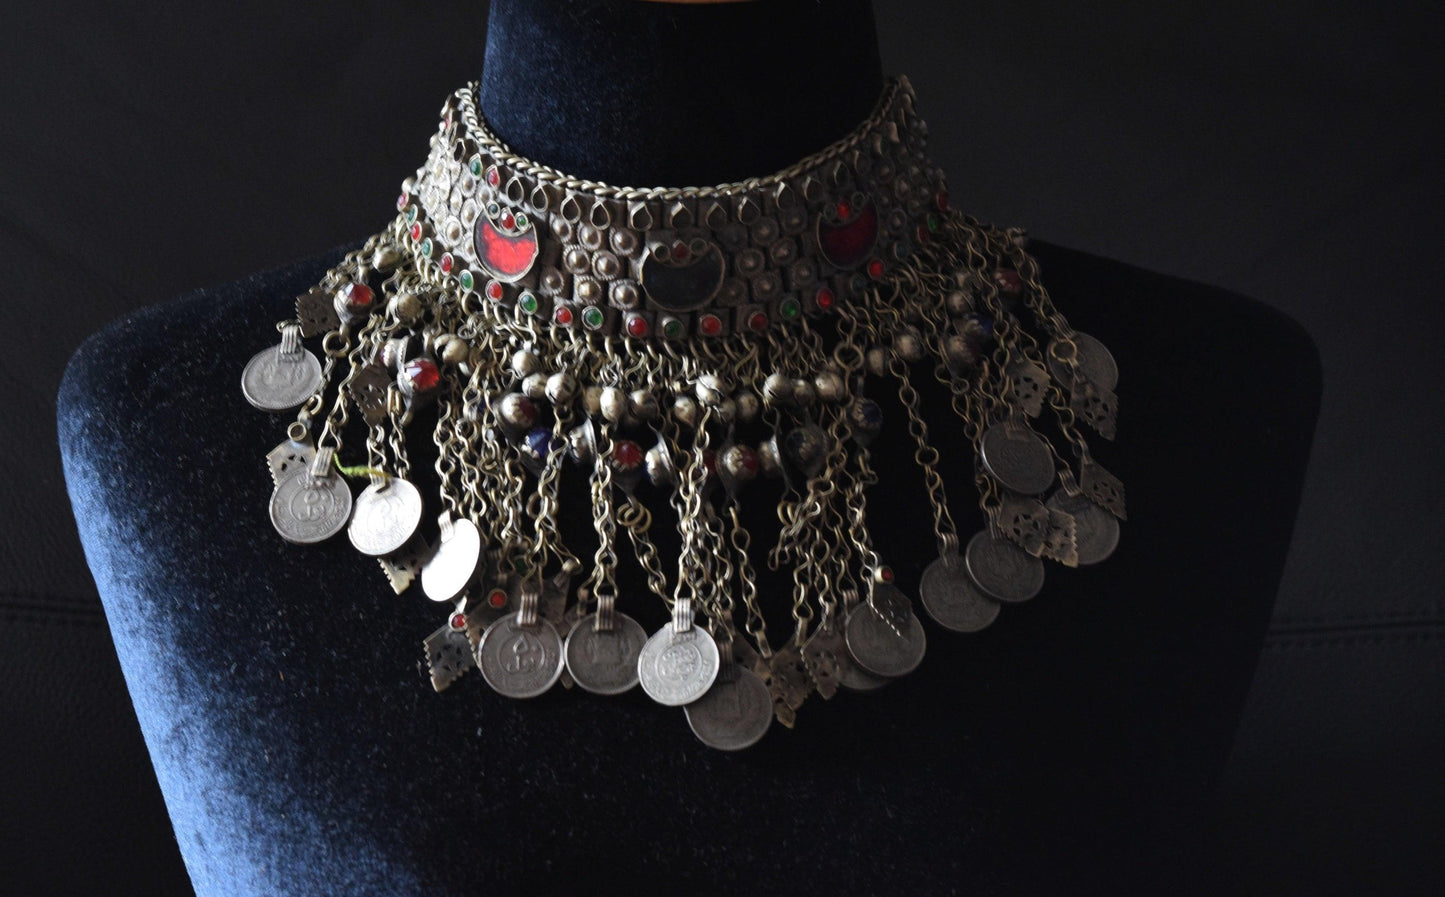 Vintage Kuchi Choker Necklace with Old Coins - Anteeka